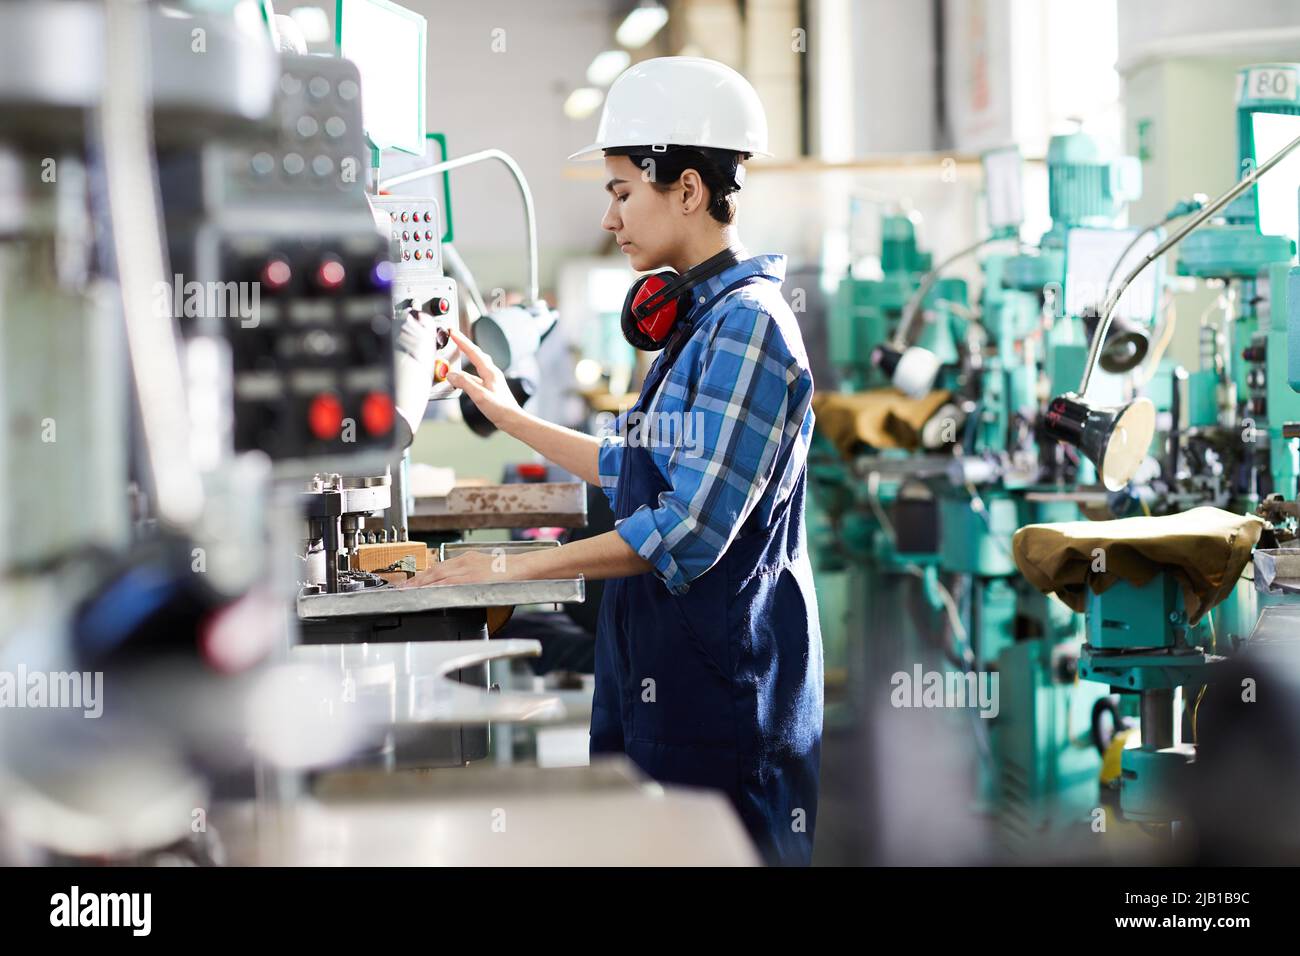 Serious young female engineer in hardhat concentrated on production process pushing button on control panel of industrial machine Stock Photo